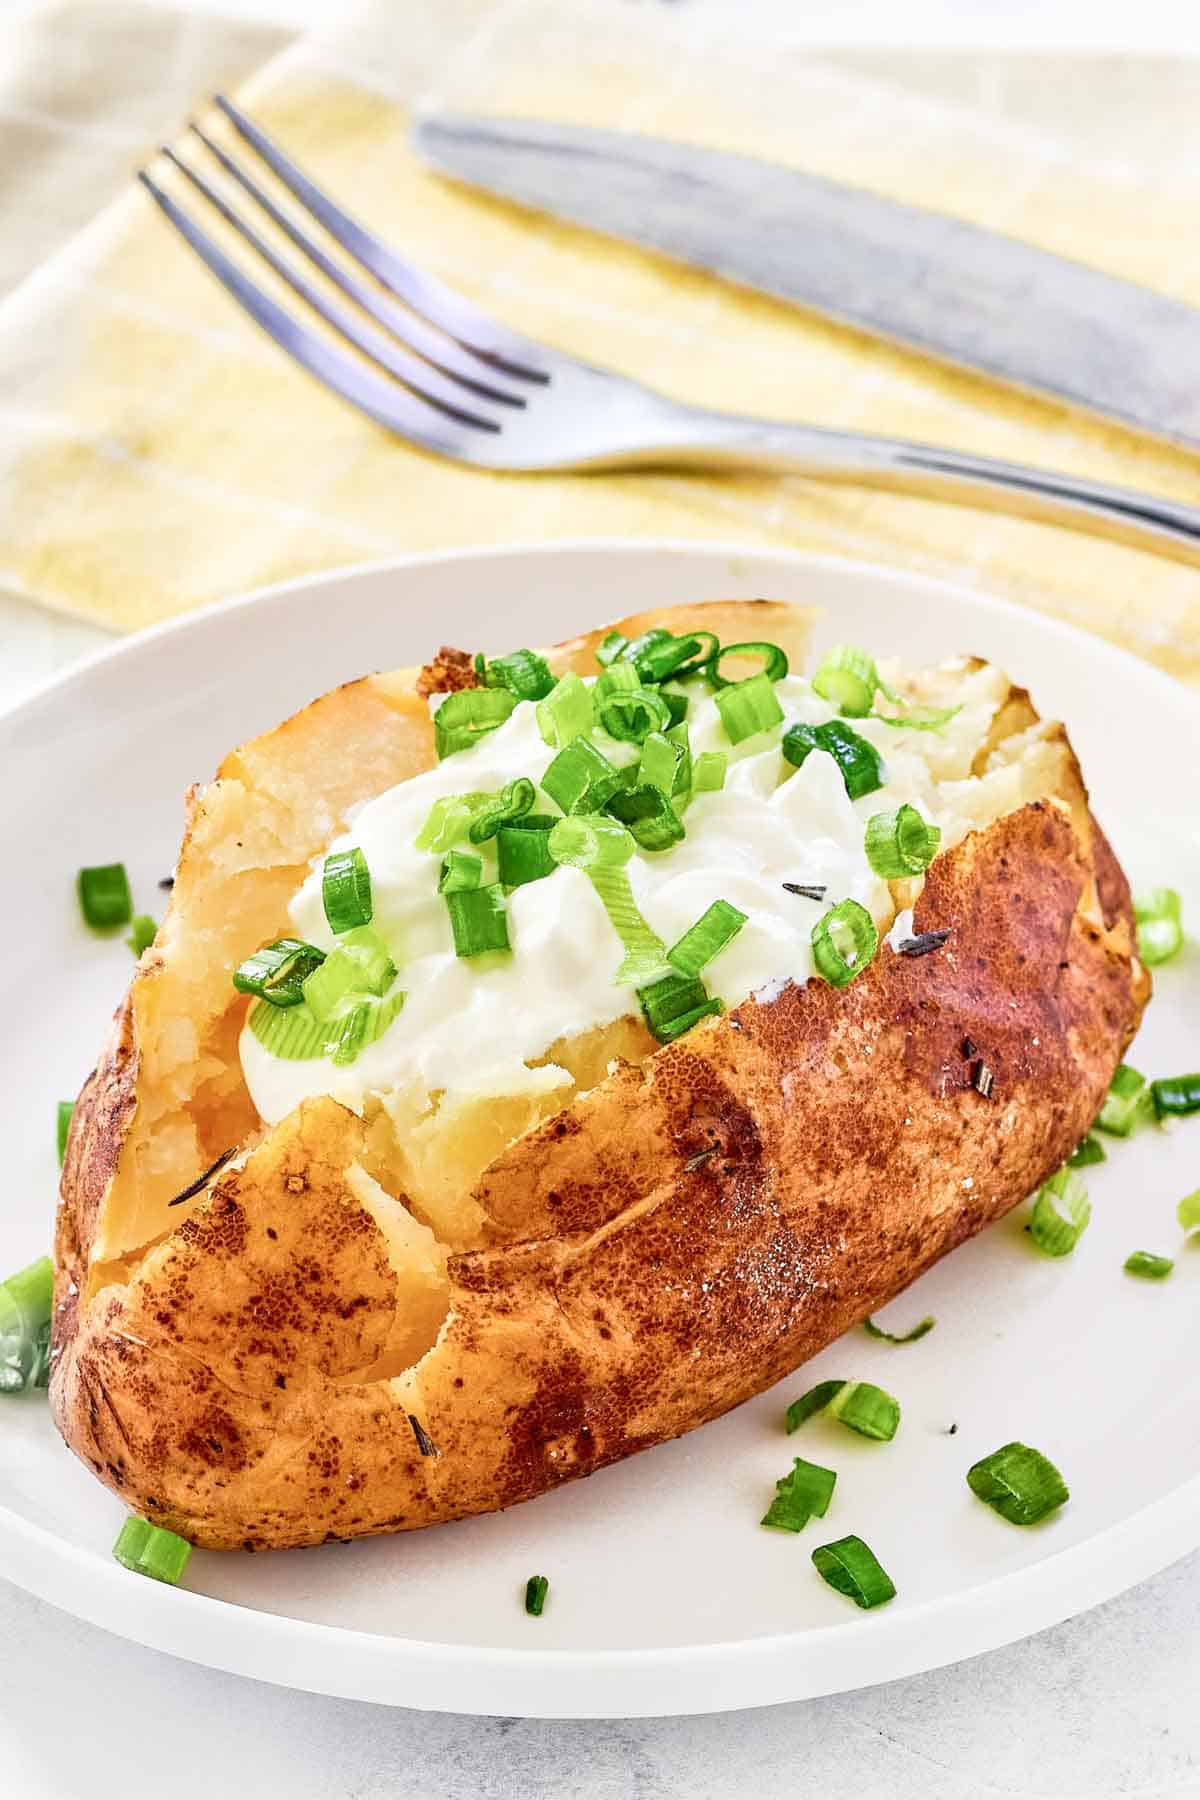 Grilled baked potato with toppings on a plate and a knife and fork on a napkin.